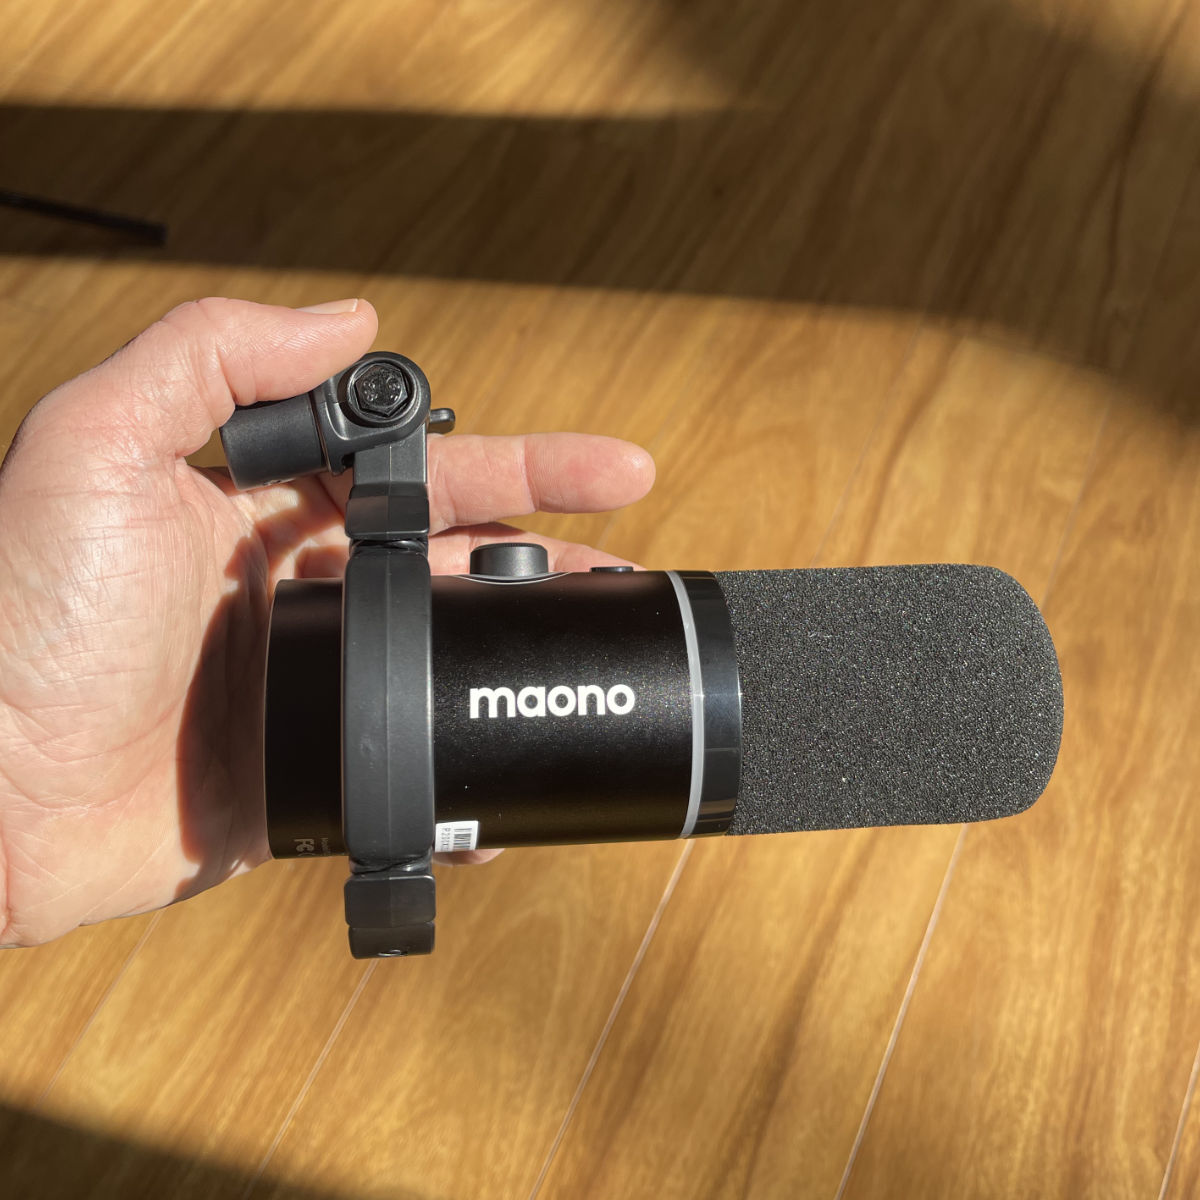 Moano PD200X microphone in hand